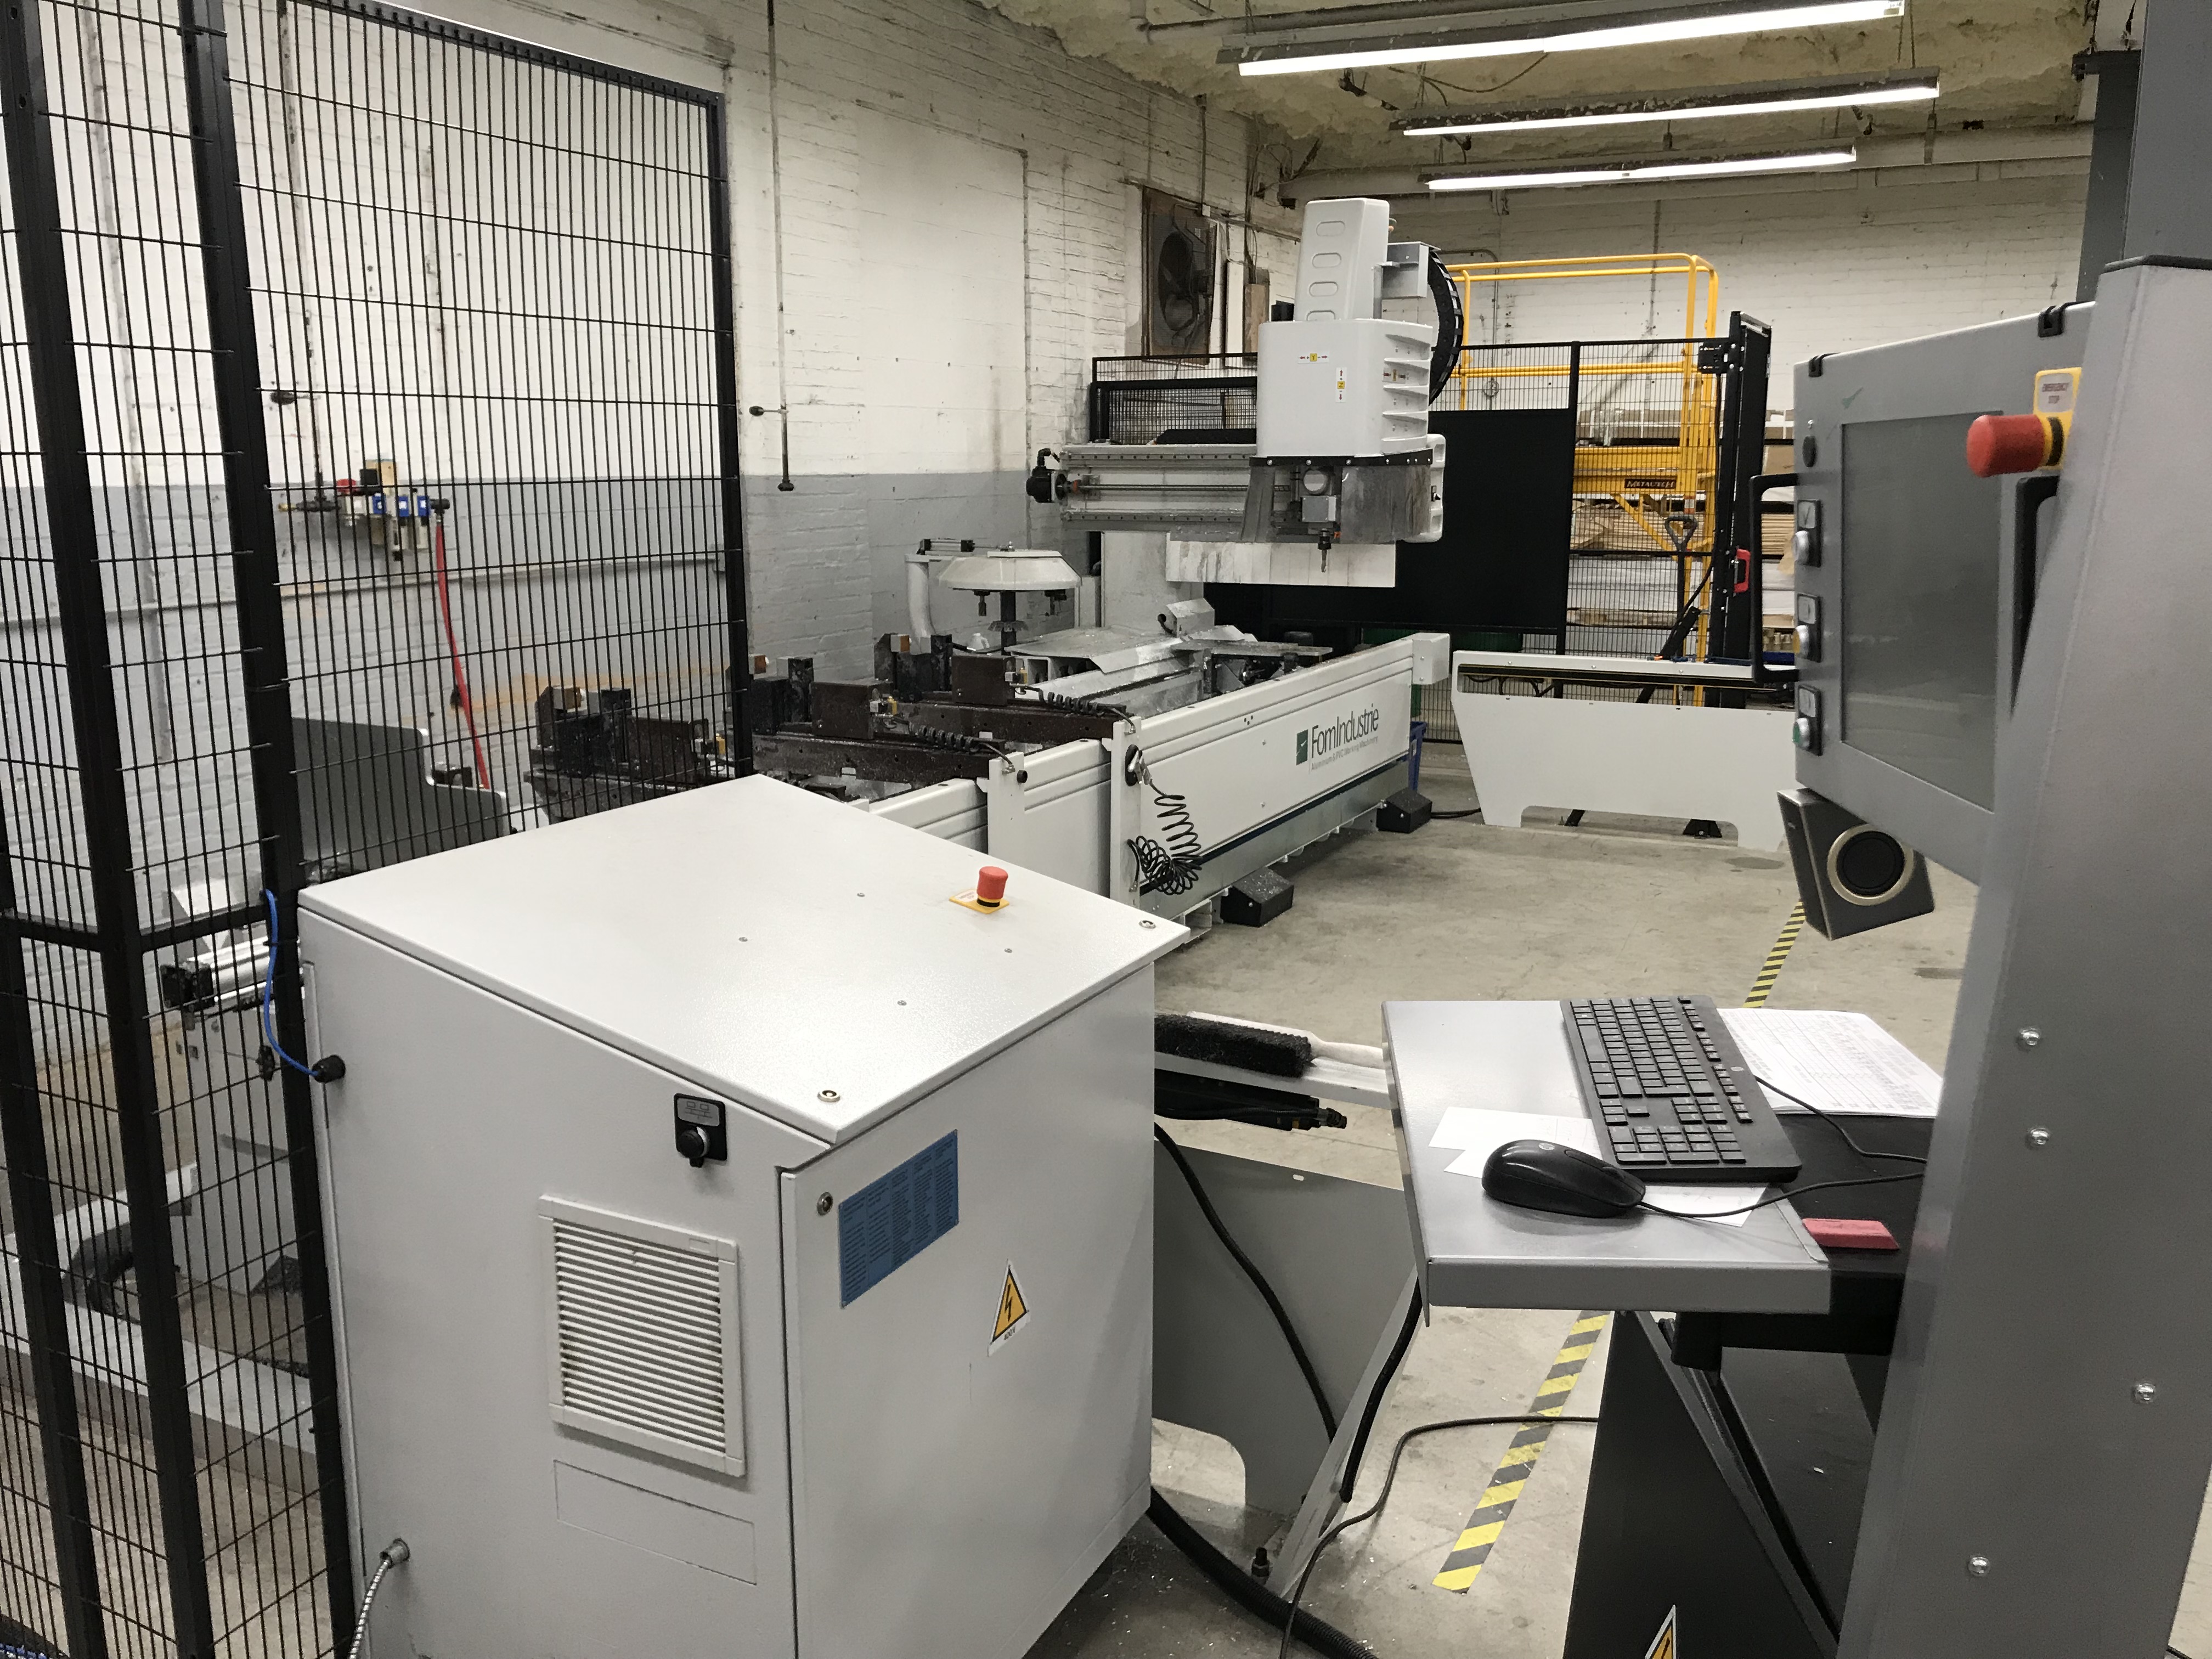 Press - Ellison Adds 4-axis Cutting Machine to Manufacturing Facility ...